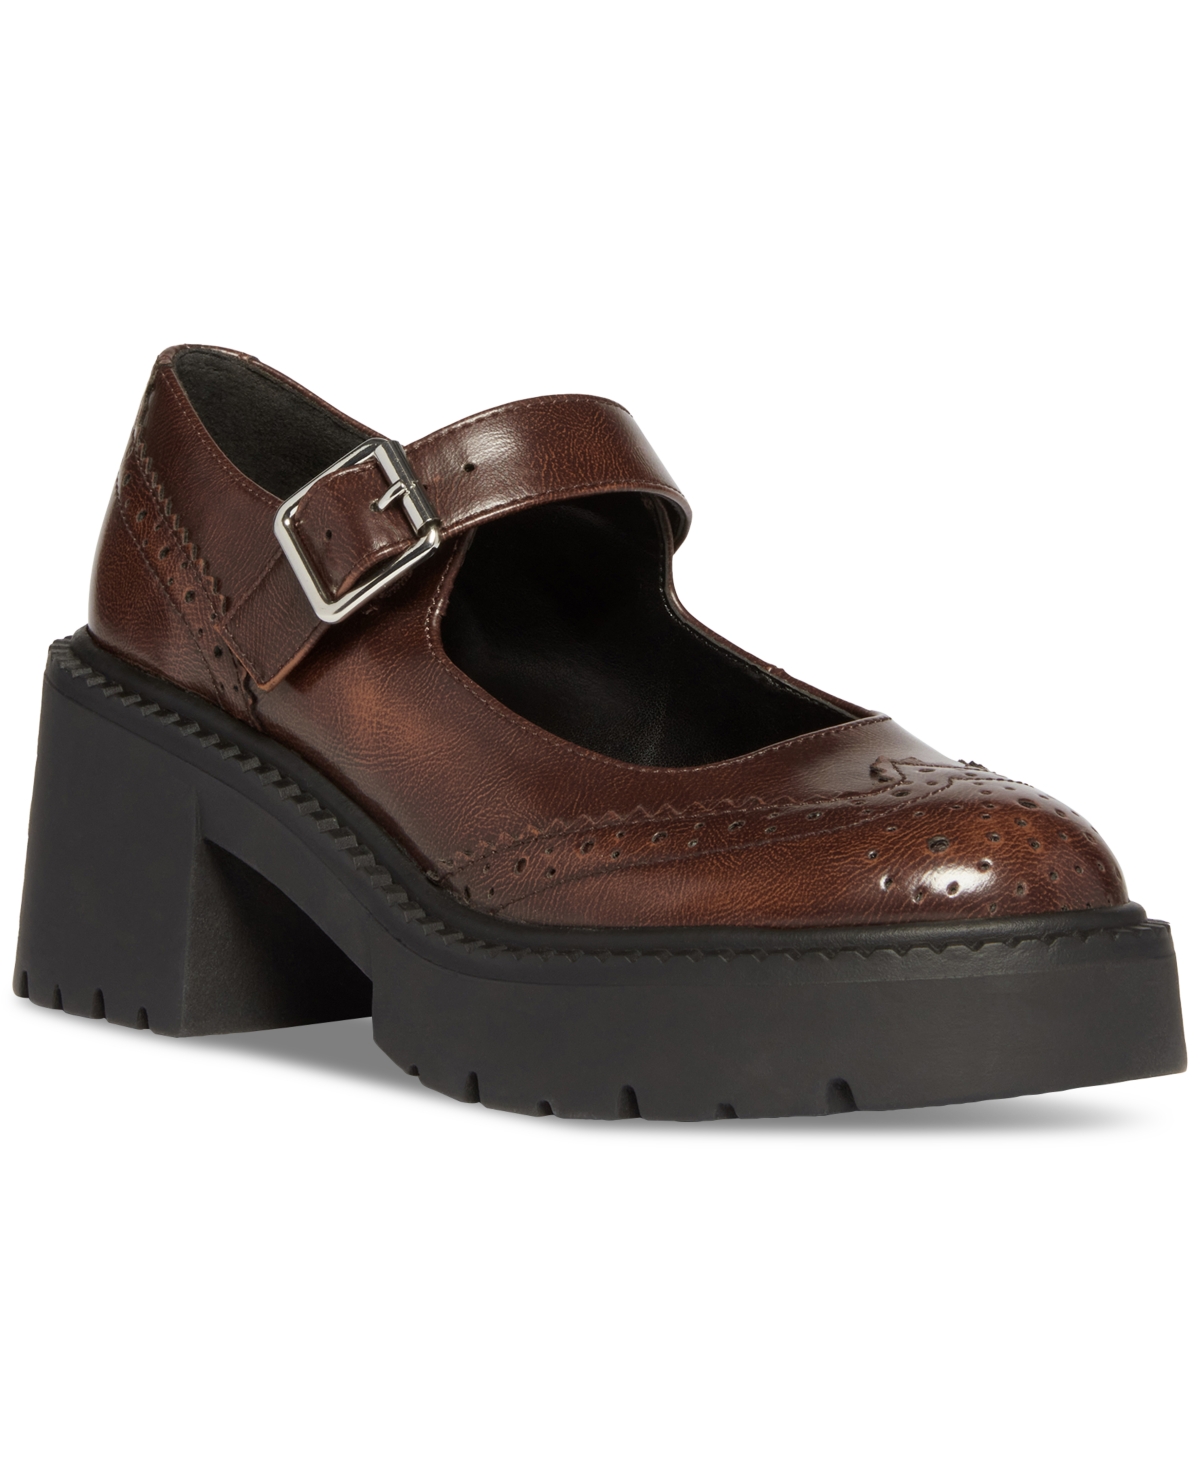 Taylor Lug-Sole Mary Jane Loafers - Burnished Brown